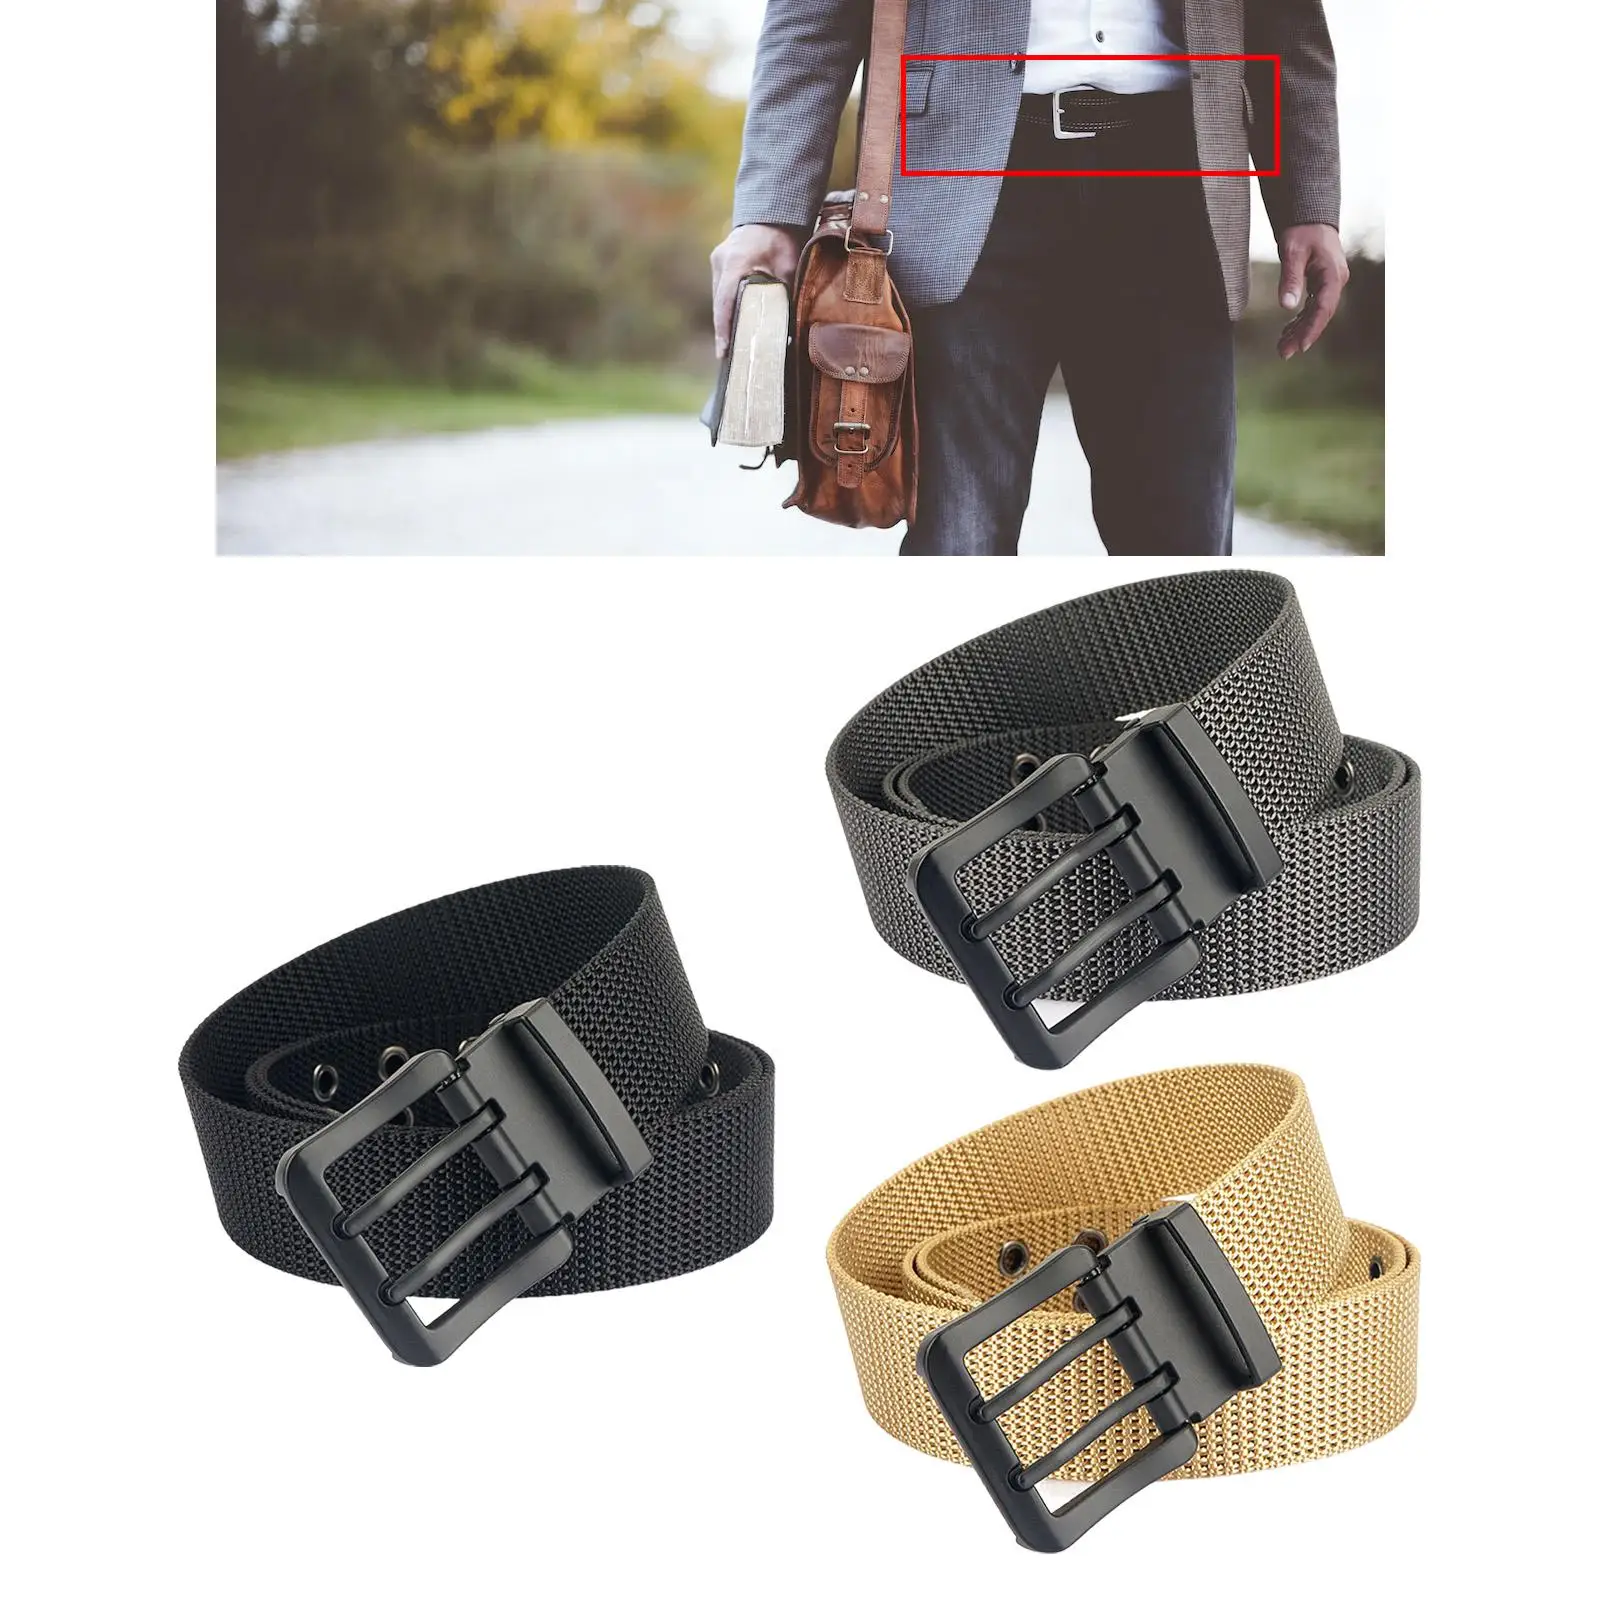 Durable Nylon Belt Waistband Adjustable Breathable Waist Belt Webbing Comfortable Men for Running Dancing Party Hunting Cosplay